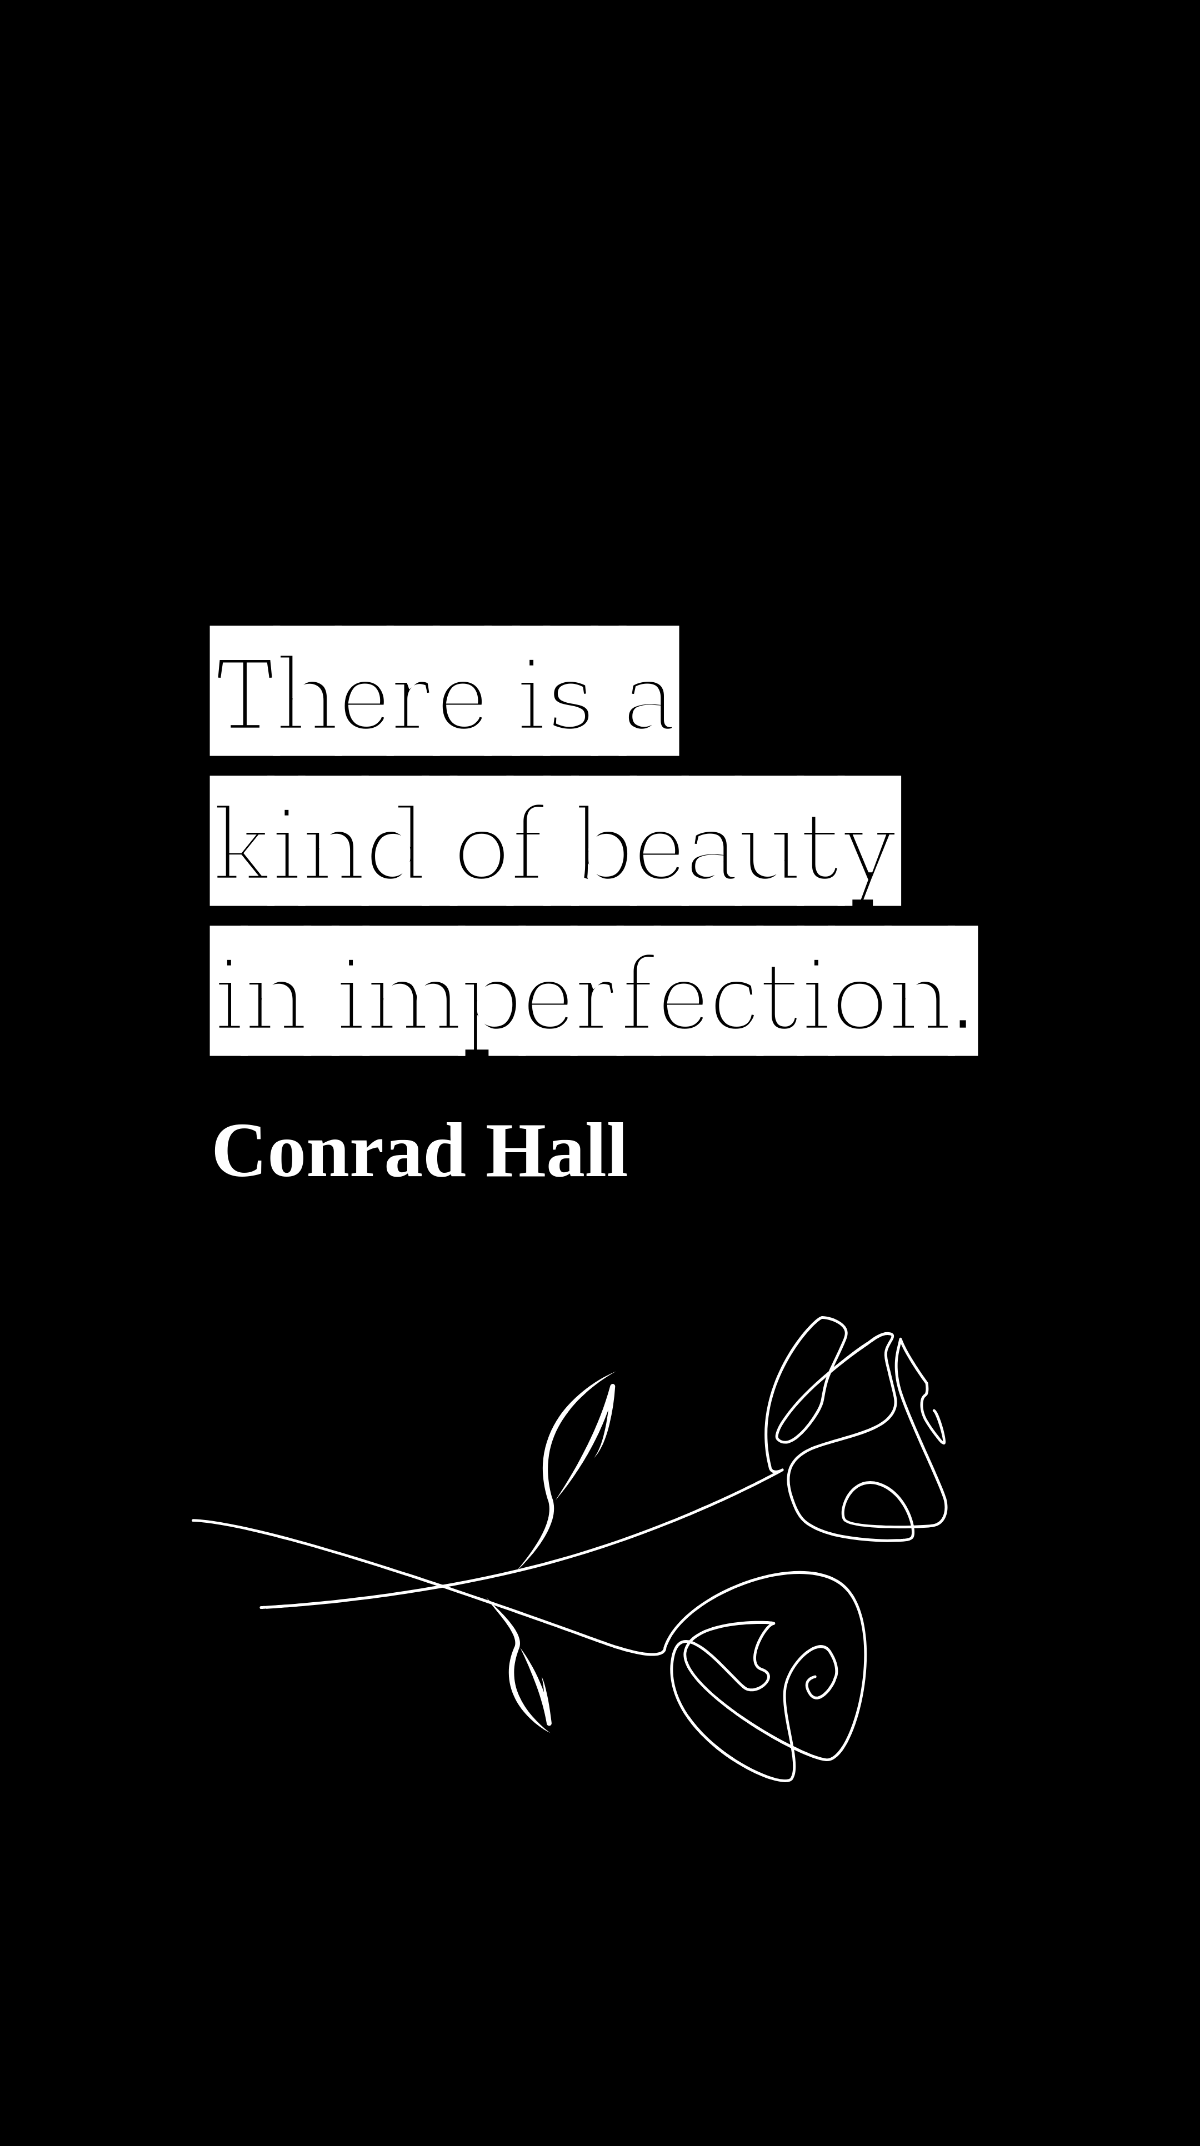 Conrad Hall - There is a kind of beauty in imperfection.